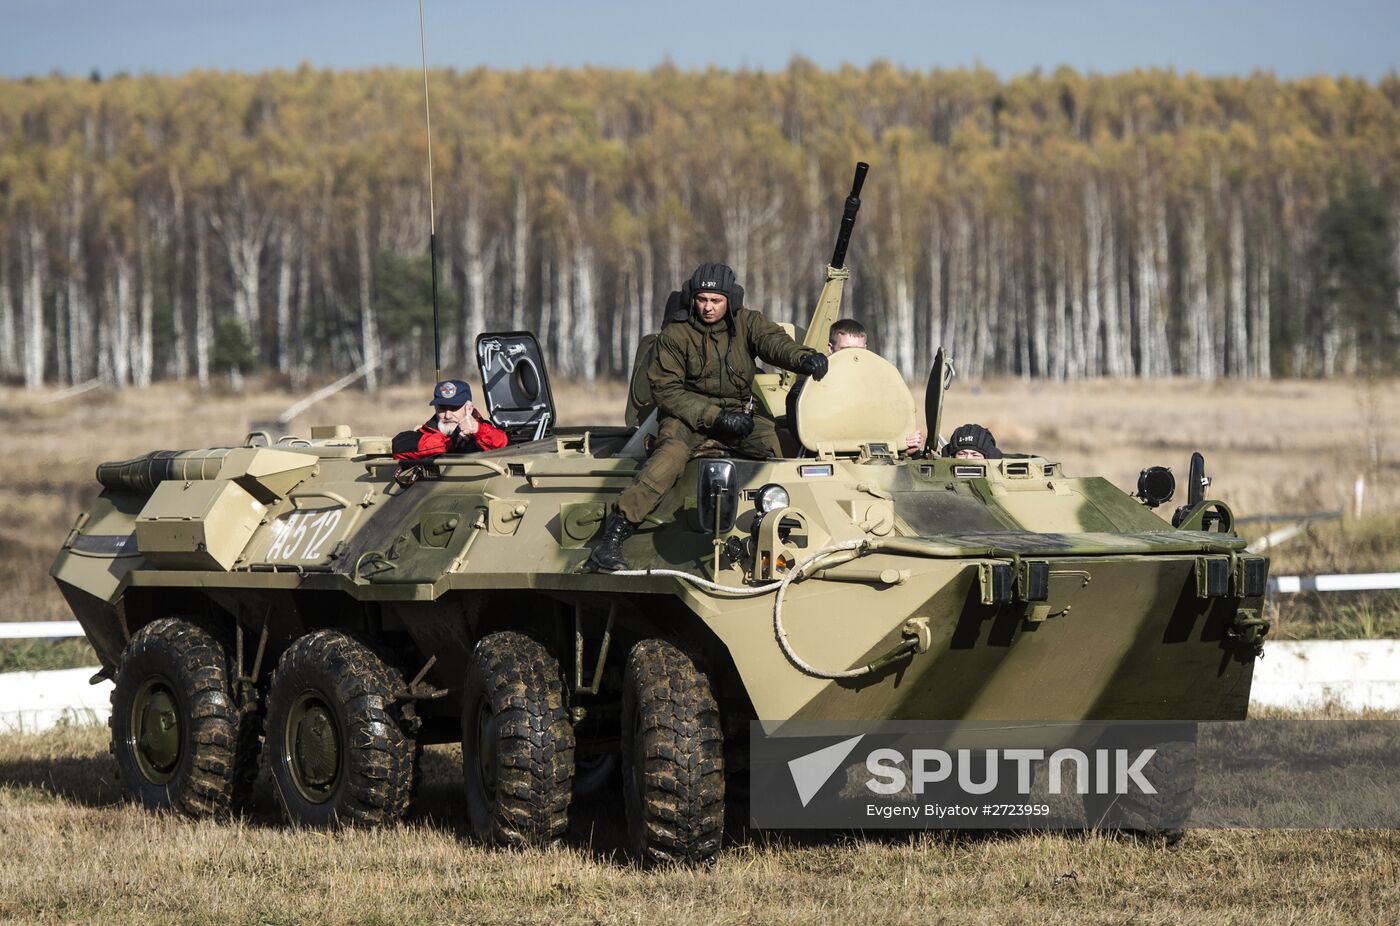 Equipment in action showcased at Interpolitex 2015 expo